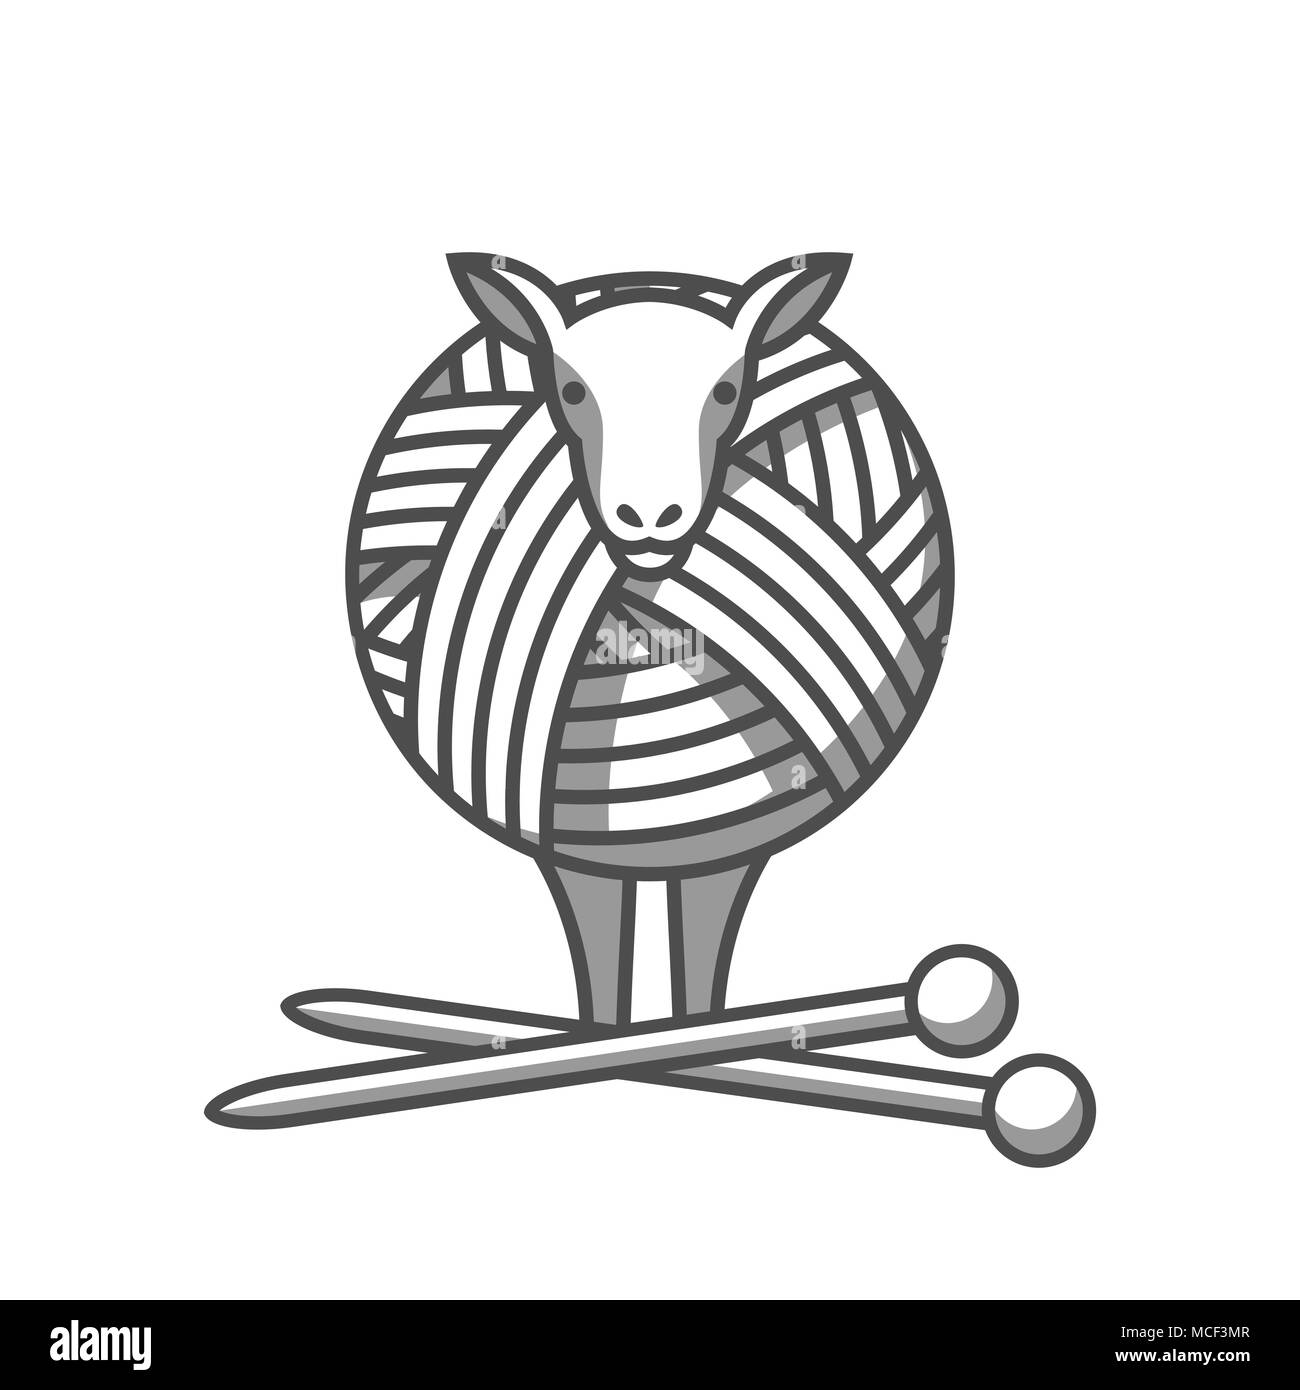 Wool emblem with sheep, tangle of yarn and knitting needles. Label for hand made, knitting or tailor shop Stock Vector